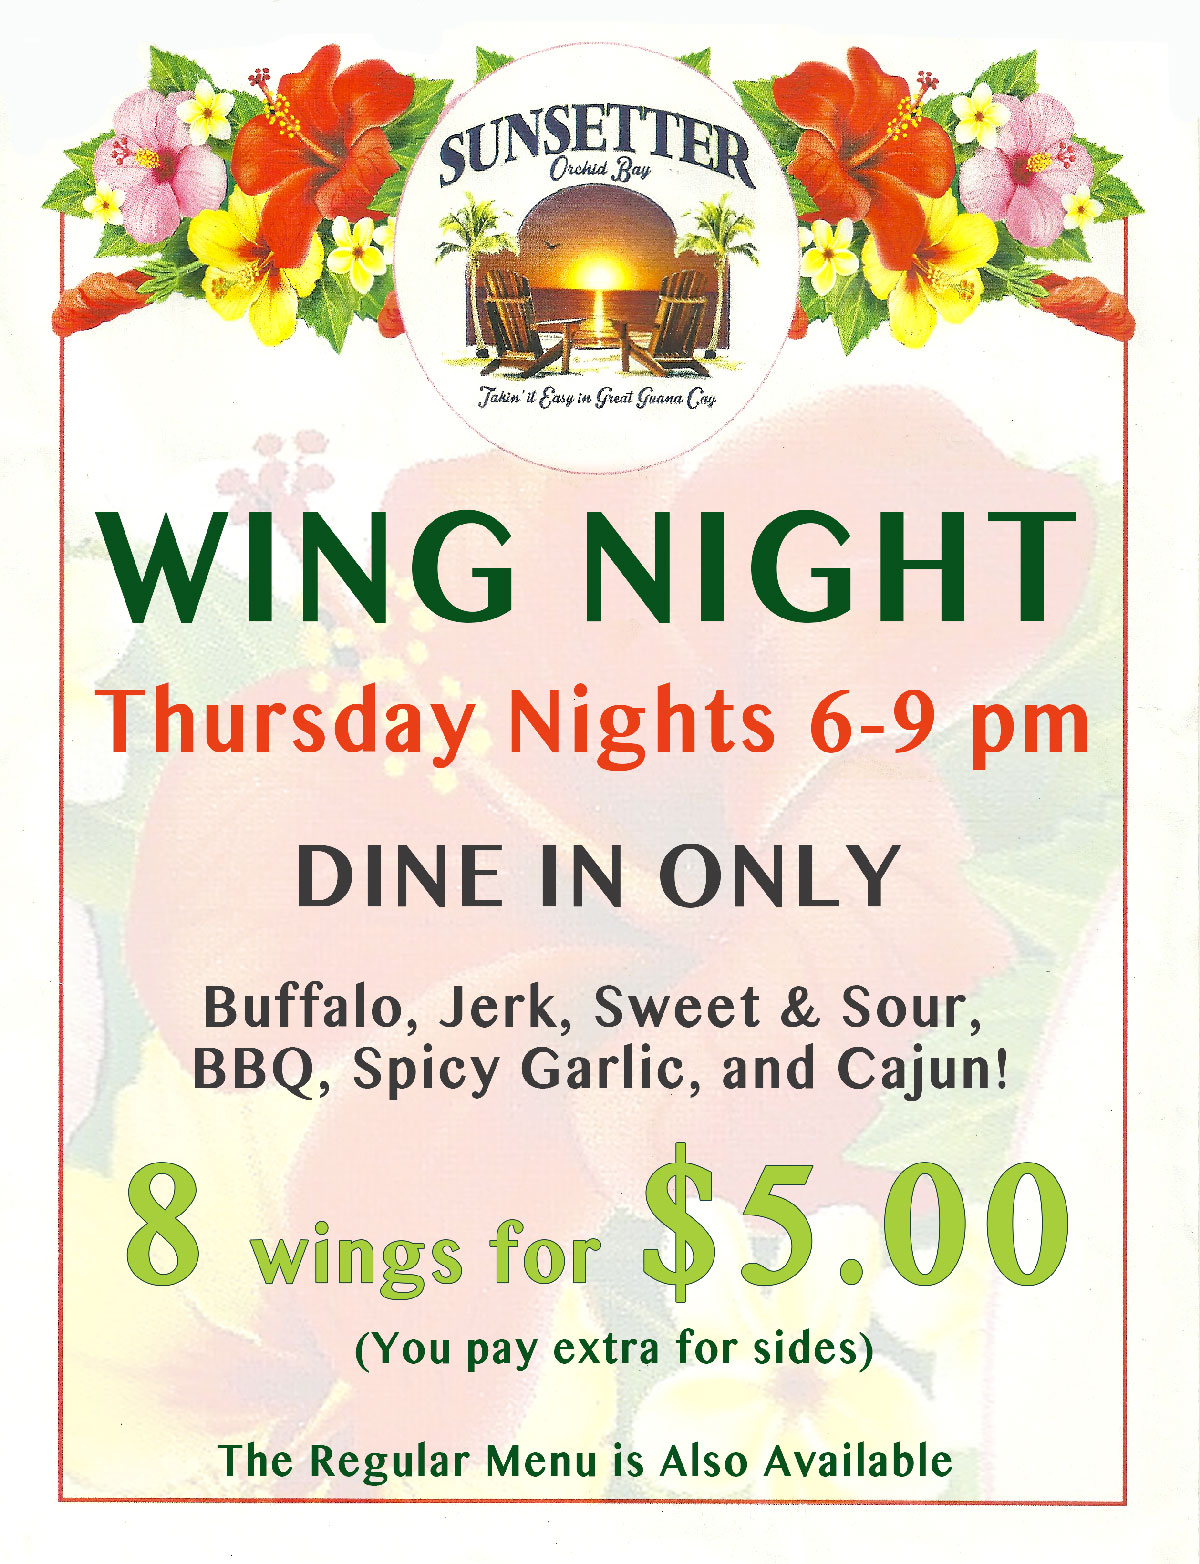 The Wing Night Special